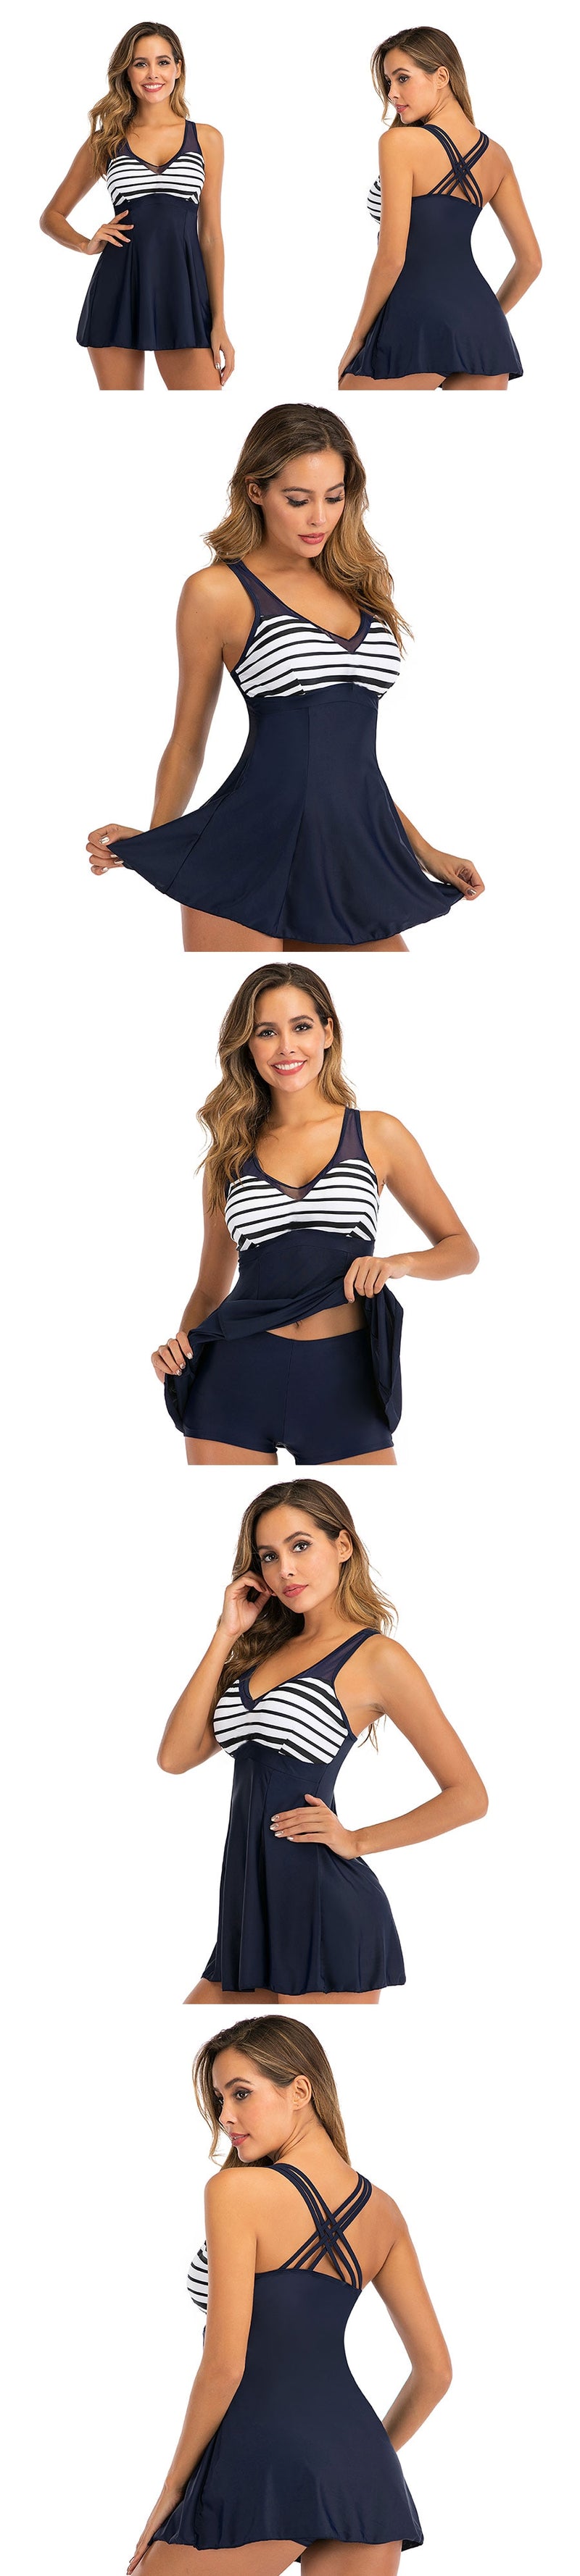 Navy Tankini Swimsuit with Skirt - Flip Flop Labs